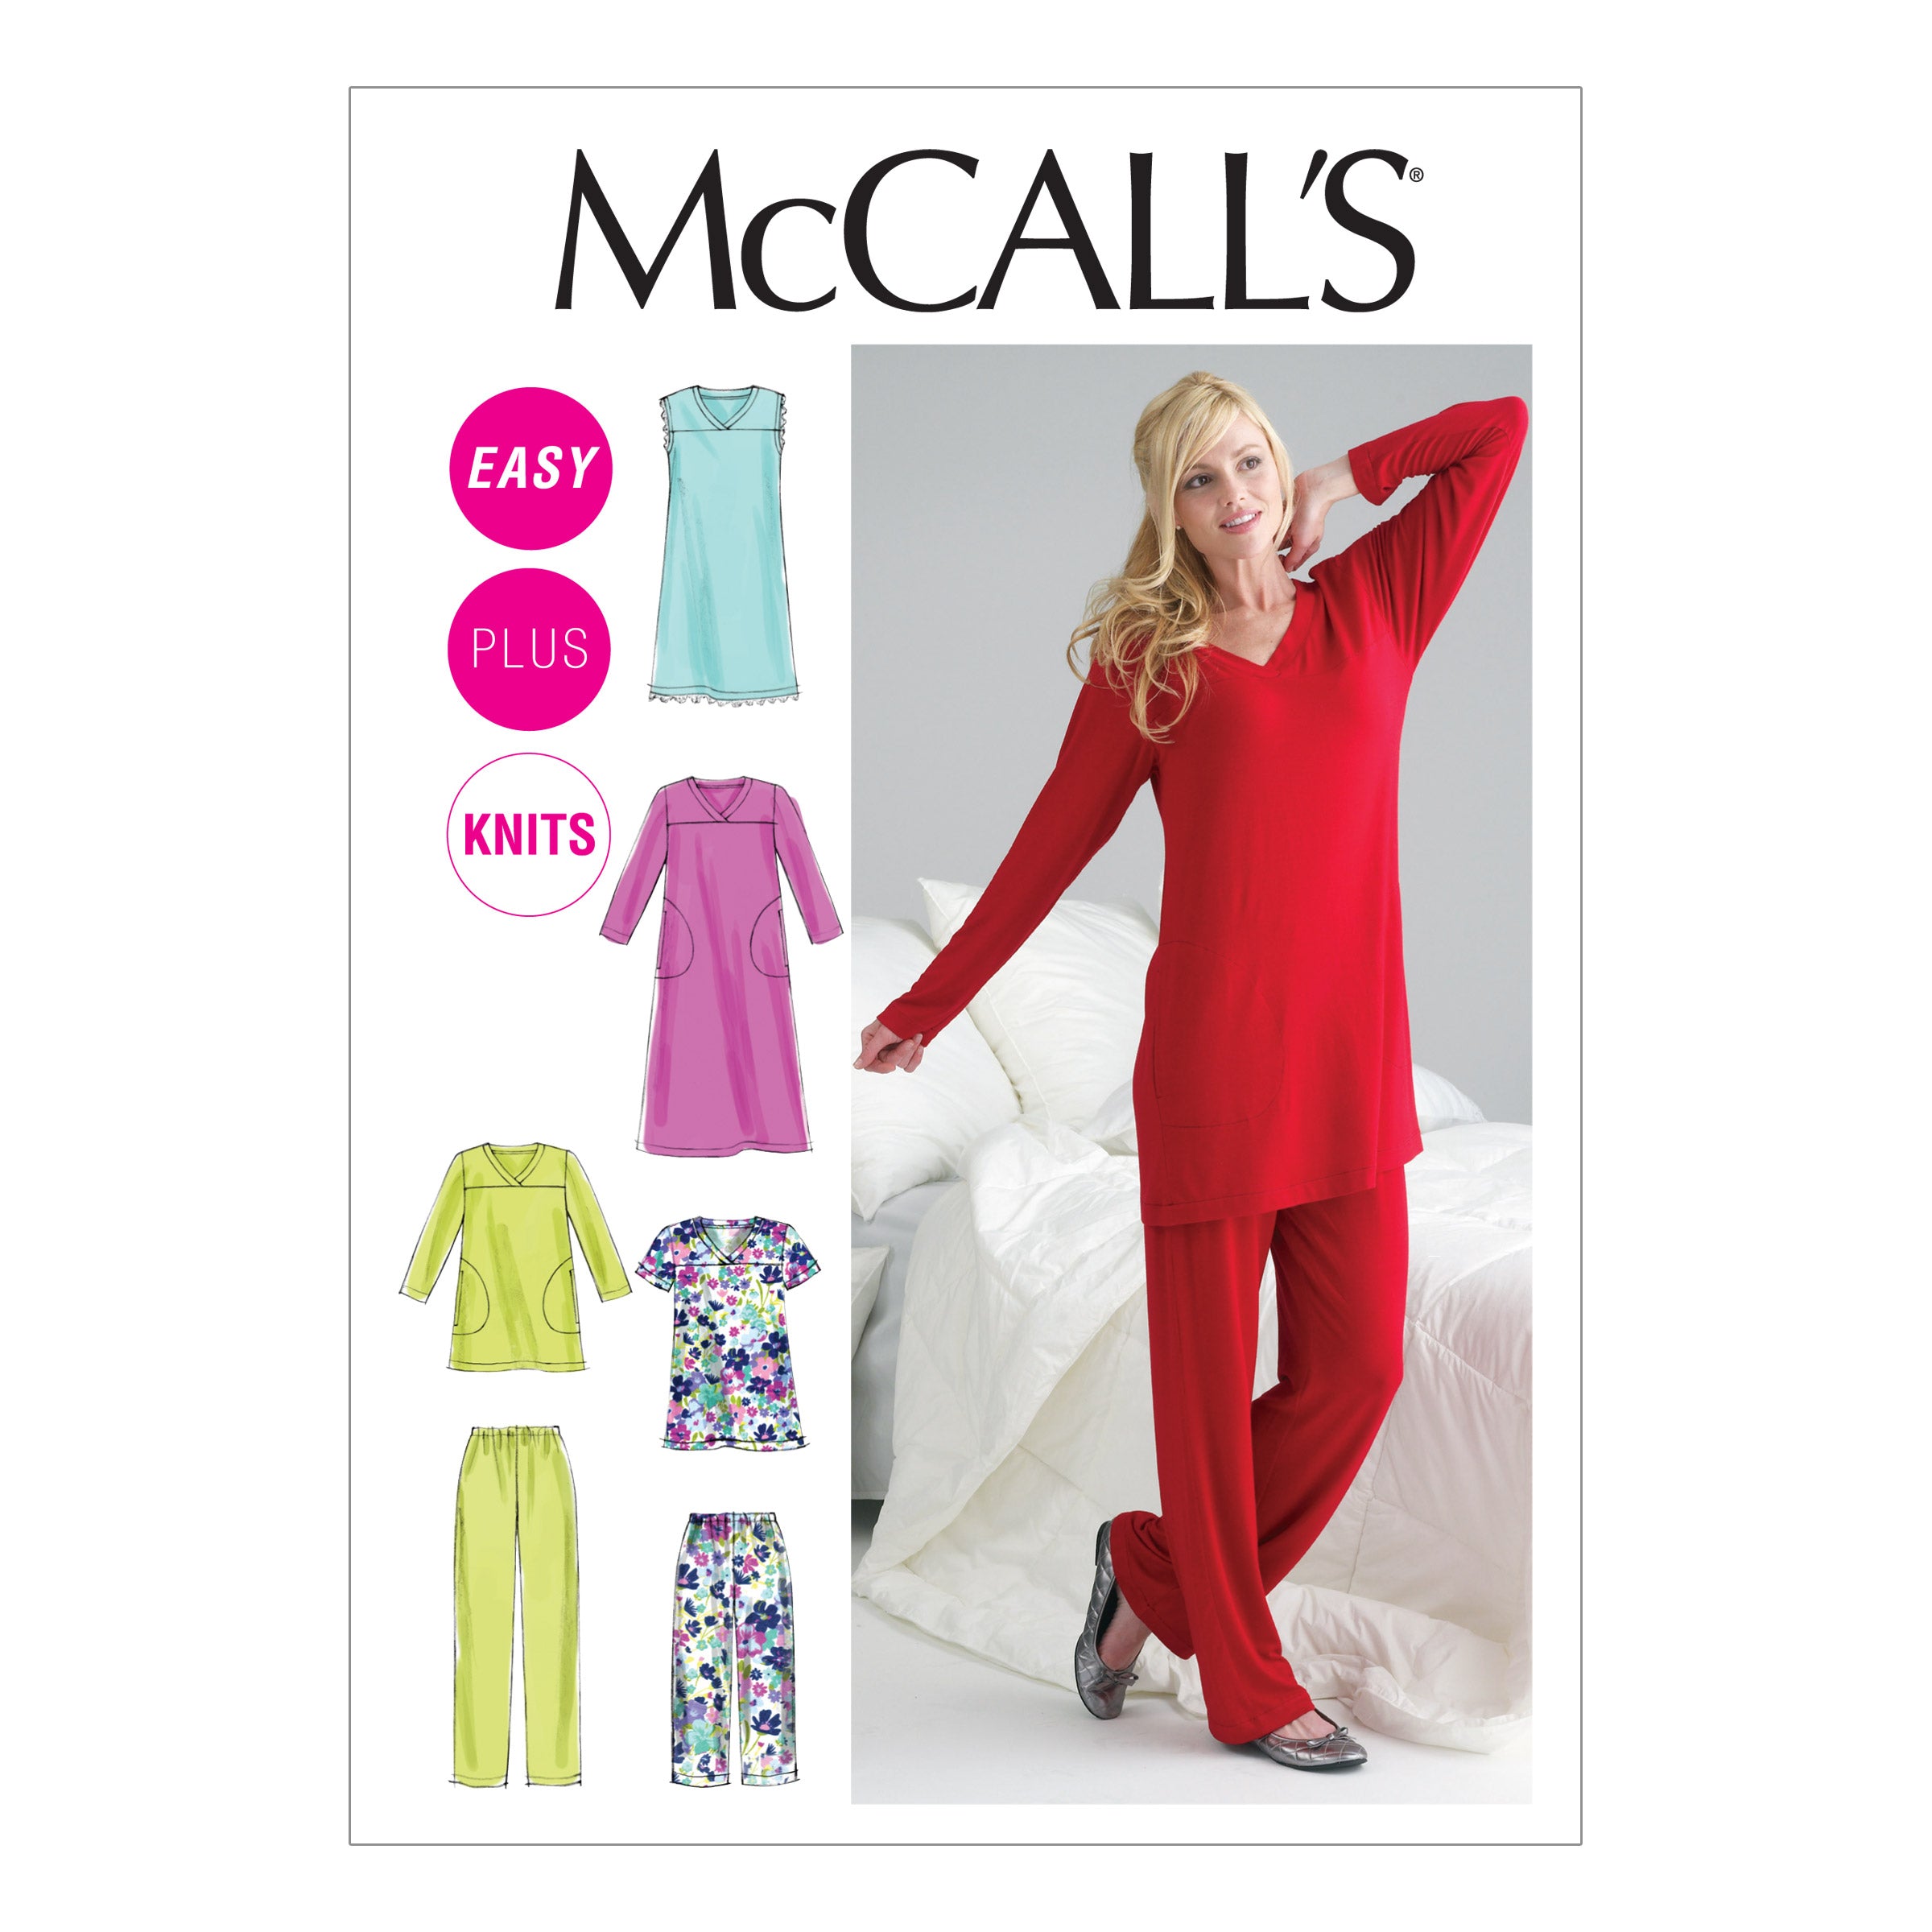 McCall's 6474 Misses'/Women's Top, Tunic, Gowns and Pants Pattern from Jaycotts Sewing Supplies